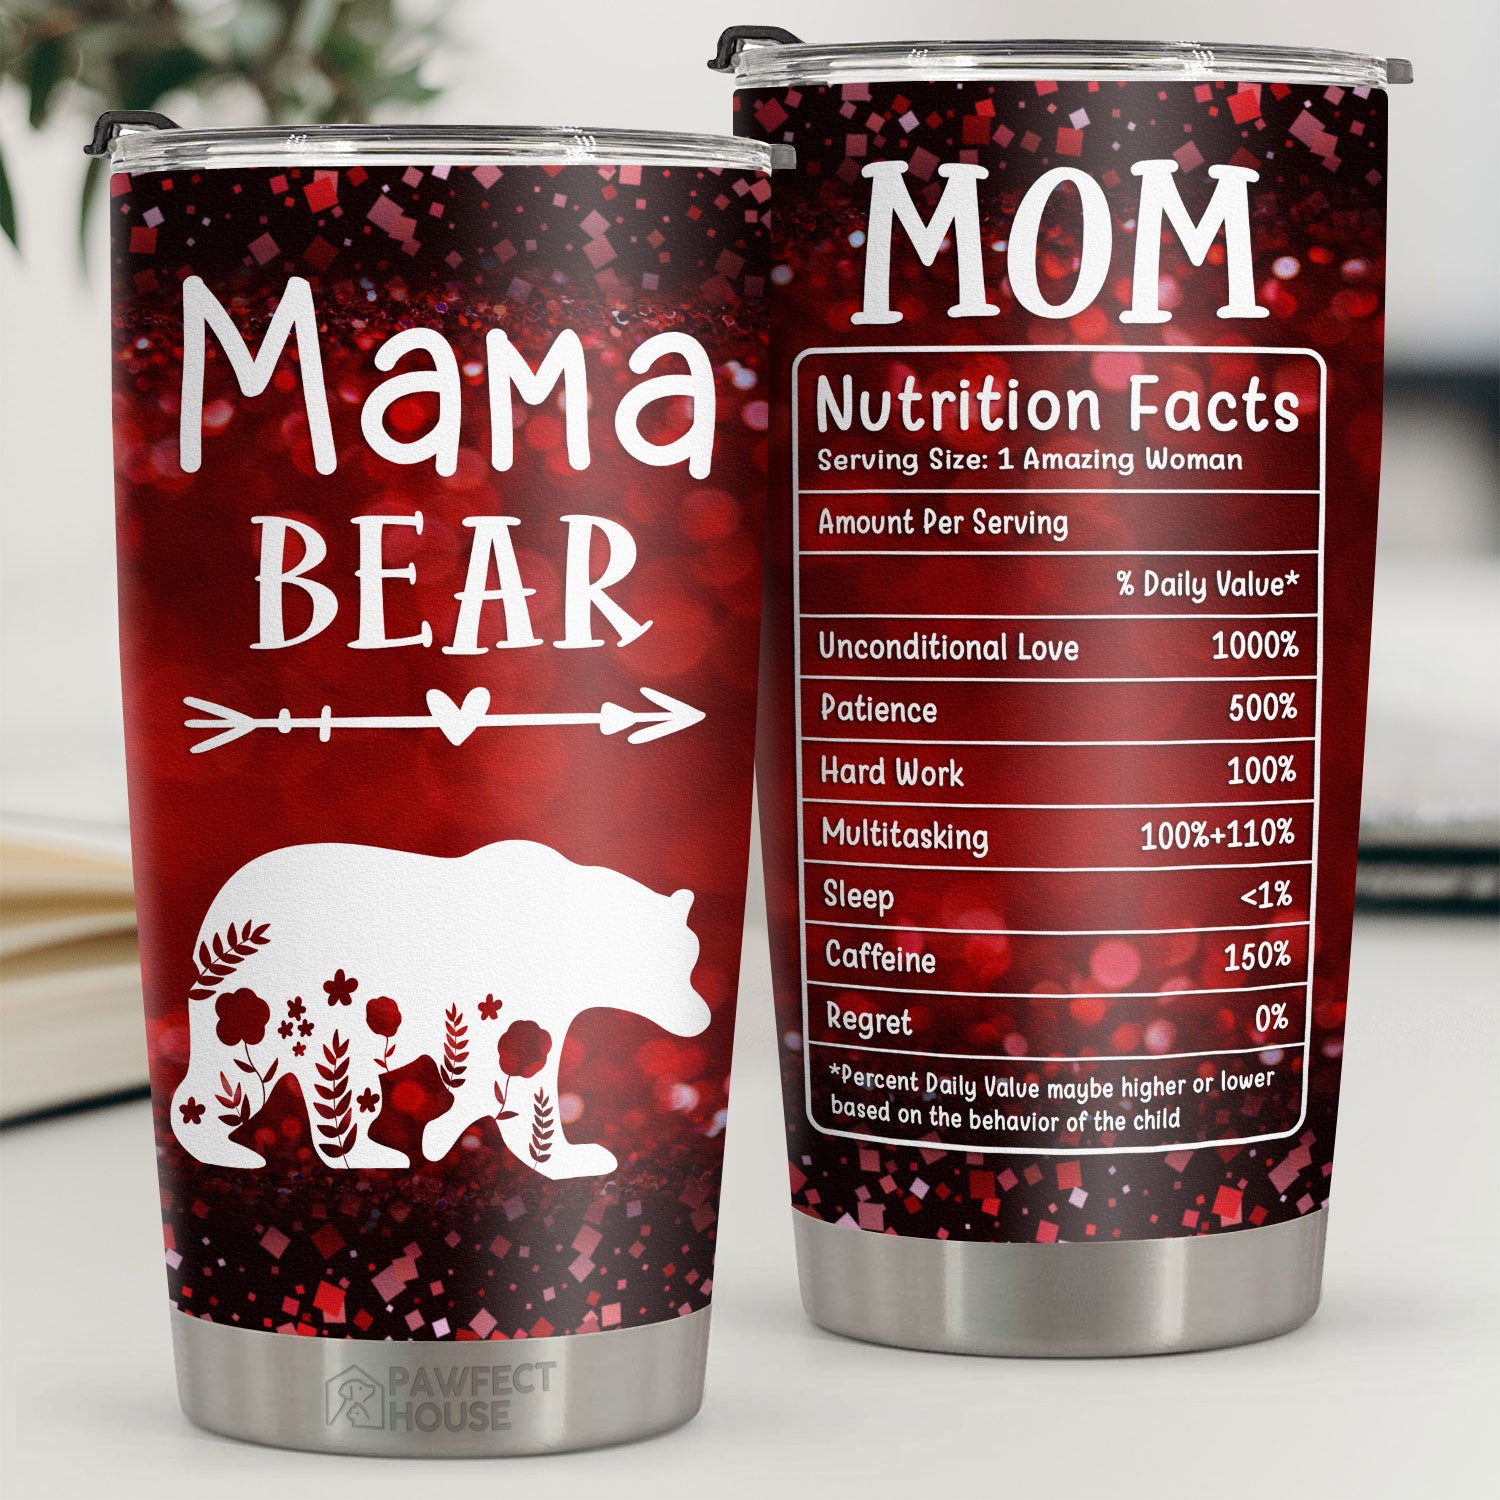 Mama Bear, Mom Nutrition Facts - Tumbler - Christmas Gift For Family, -  Pawfect House ™